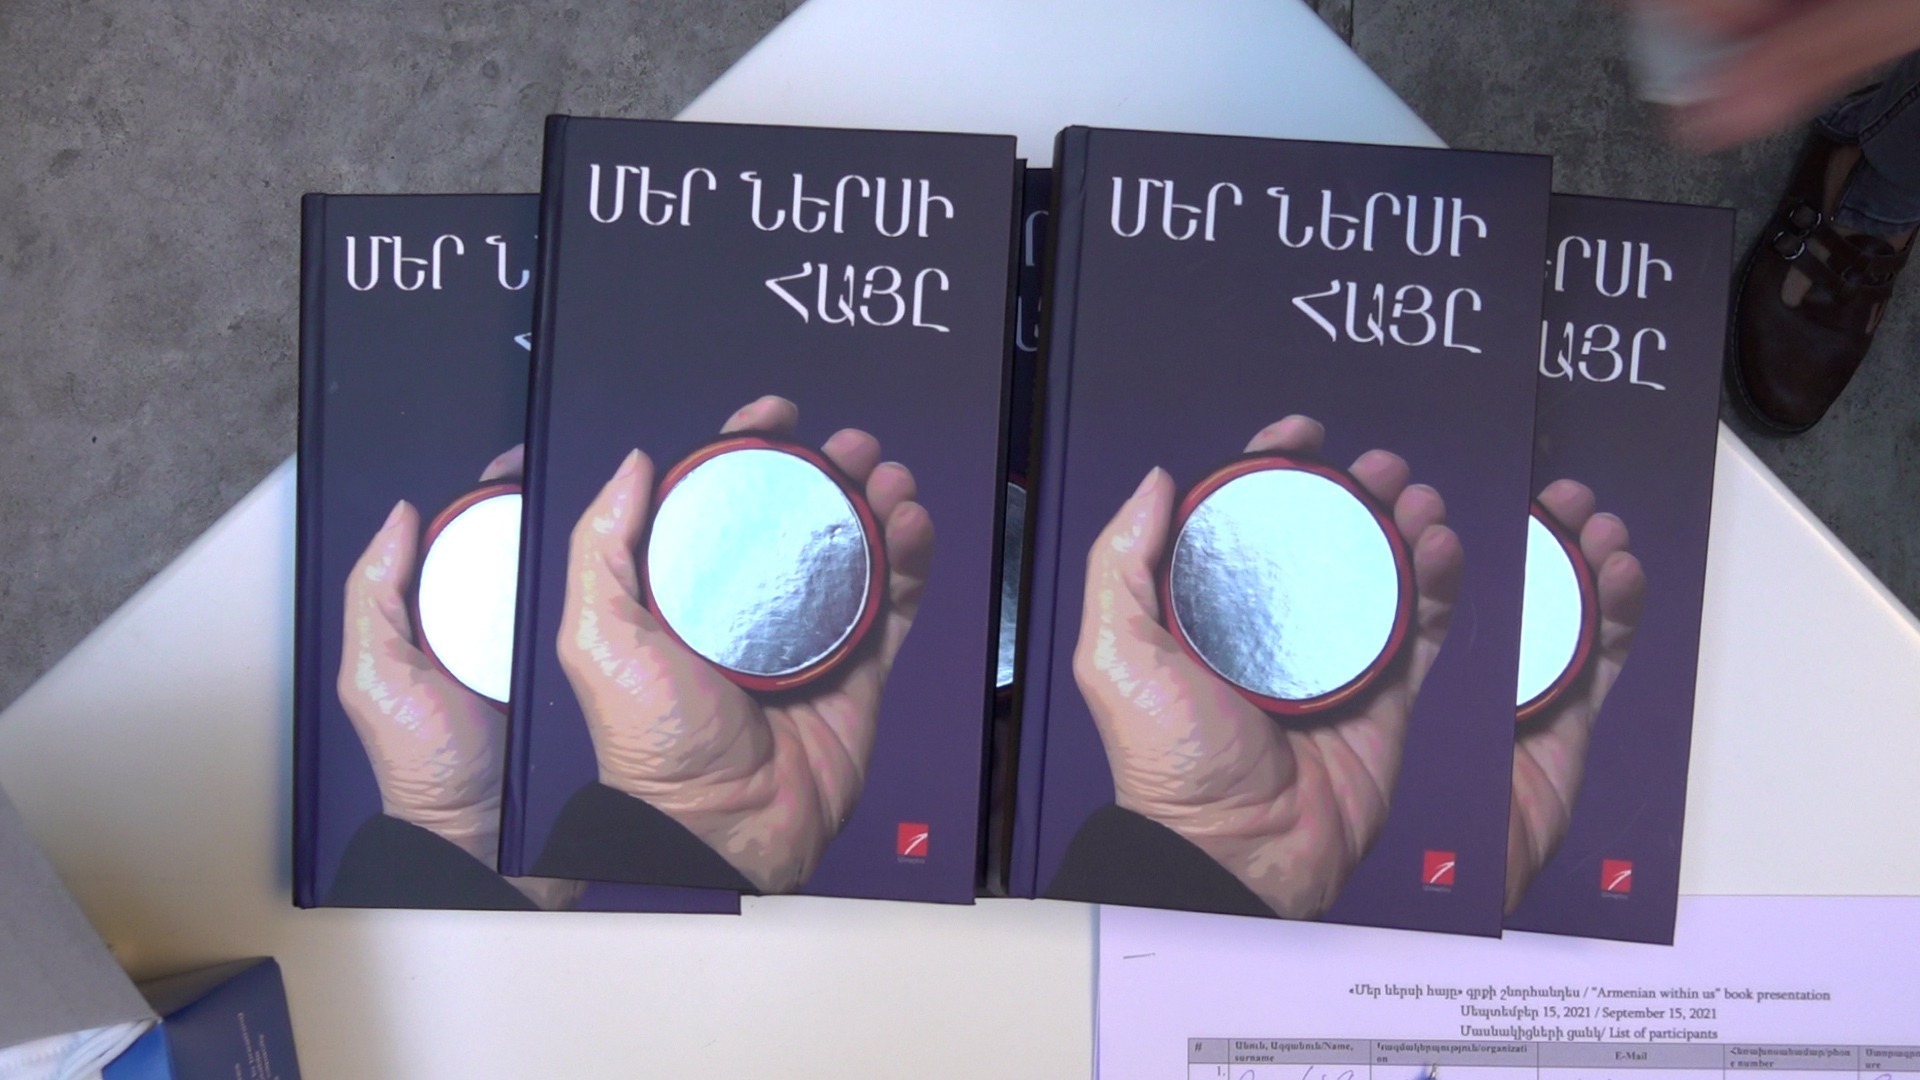 The Armenian Within Us: A book launch in memory of Hrant Dink